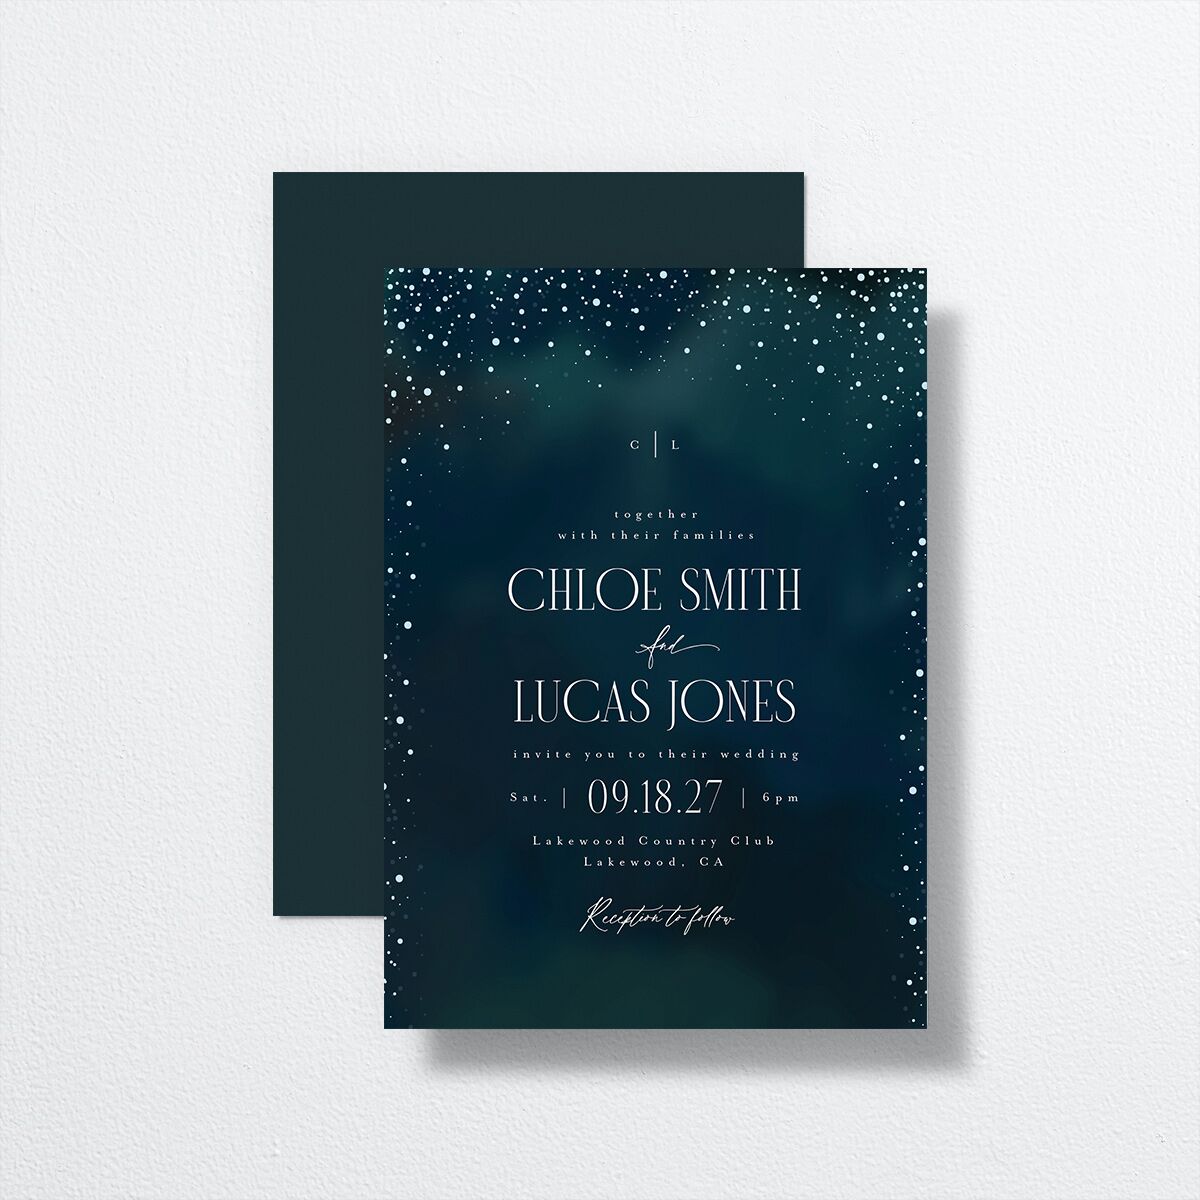 Sparkling Night Wedding Invitations front-and-back in blue